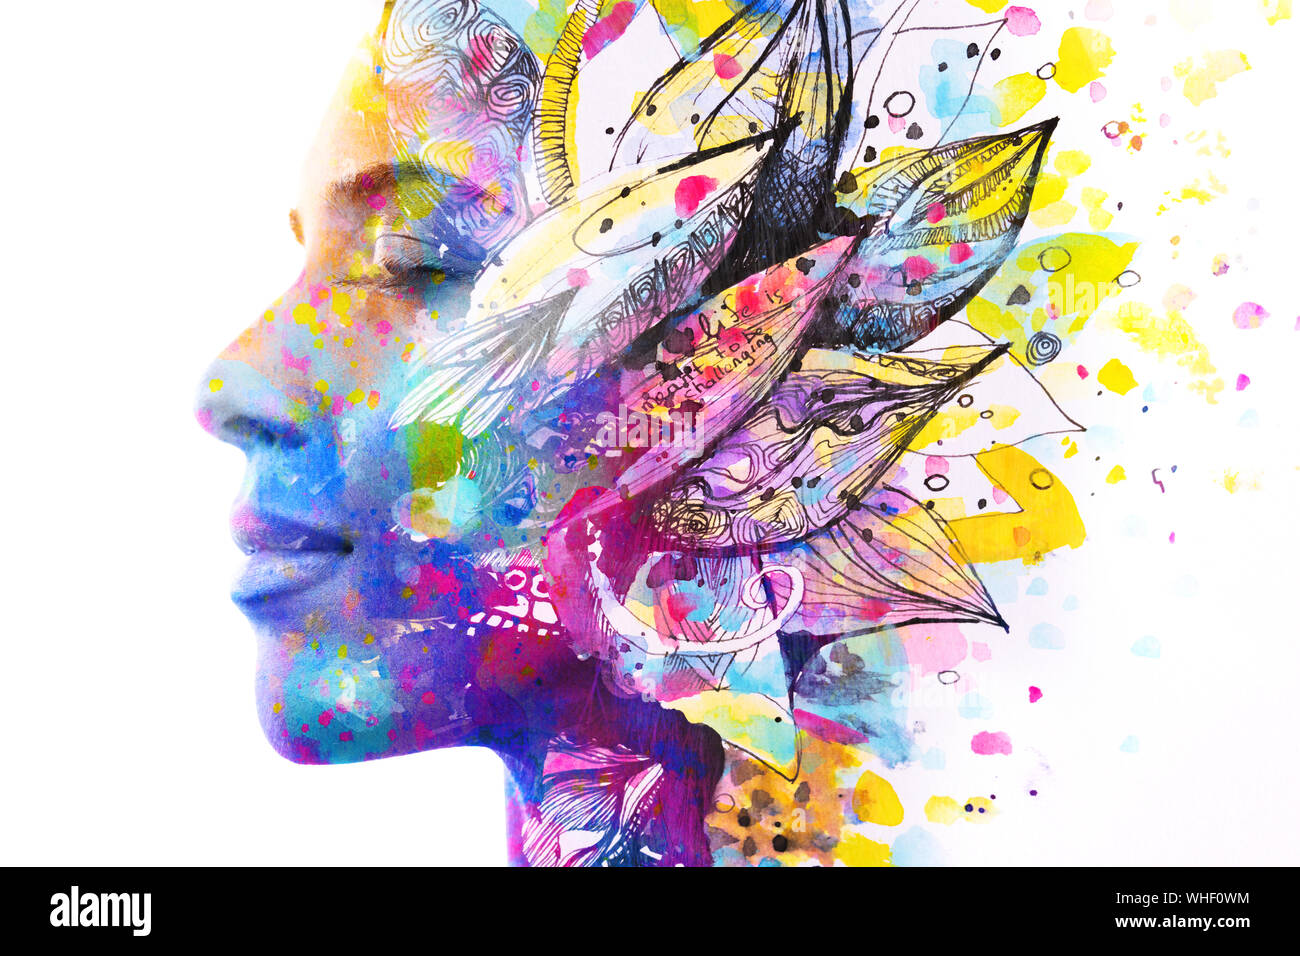 Paintography. Double exposure of woman's profile dissolving into bright colorful leaf drawings with hidden message about life Stock Photo